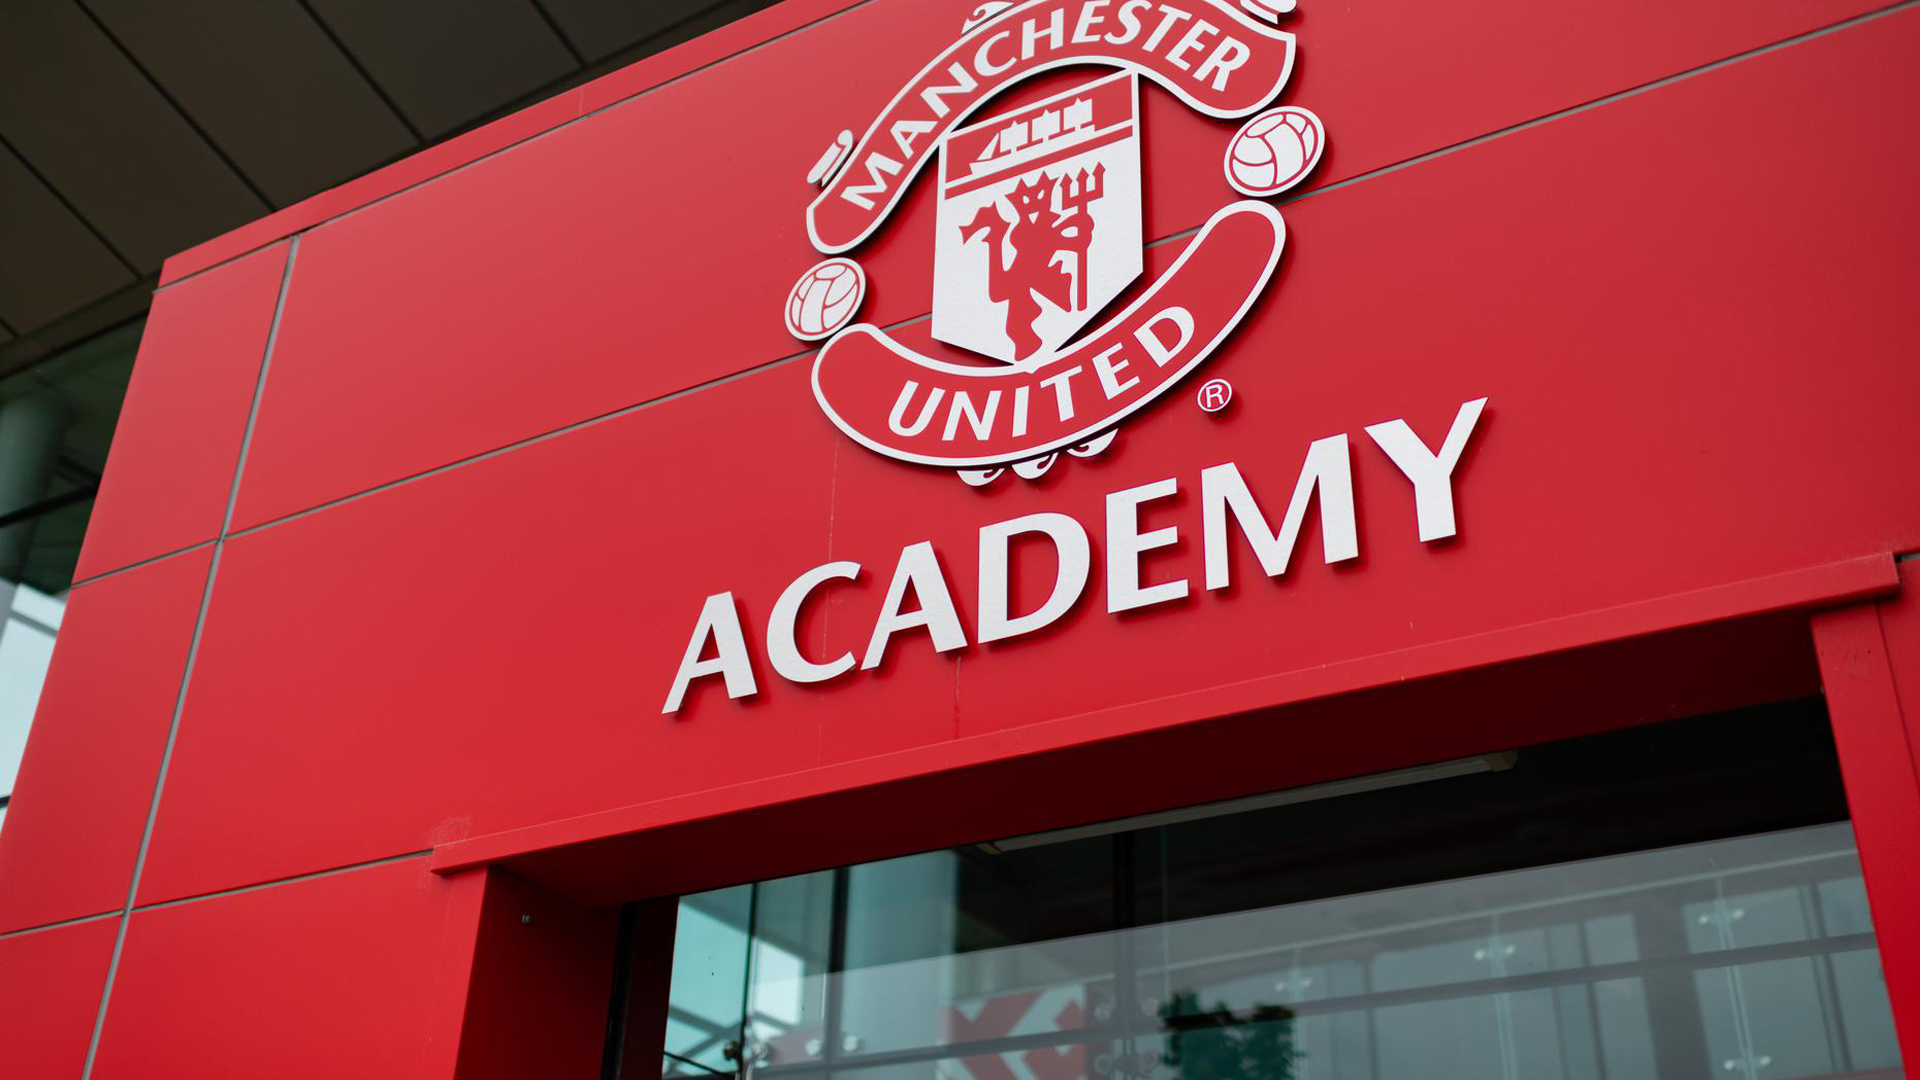 NCE-Soccer-will-face-Manchester-United-Academy-this-summer